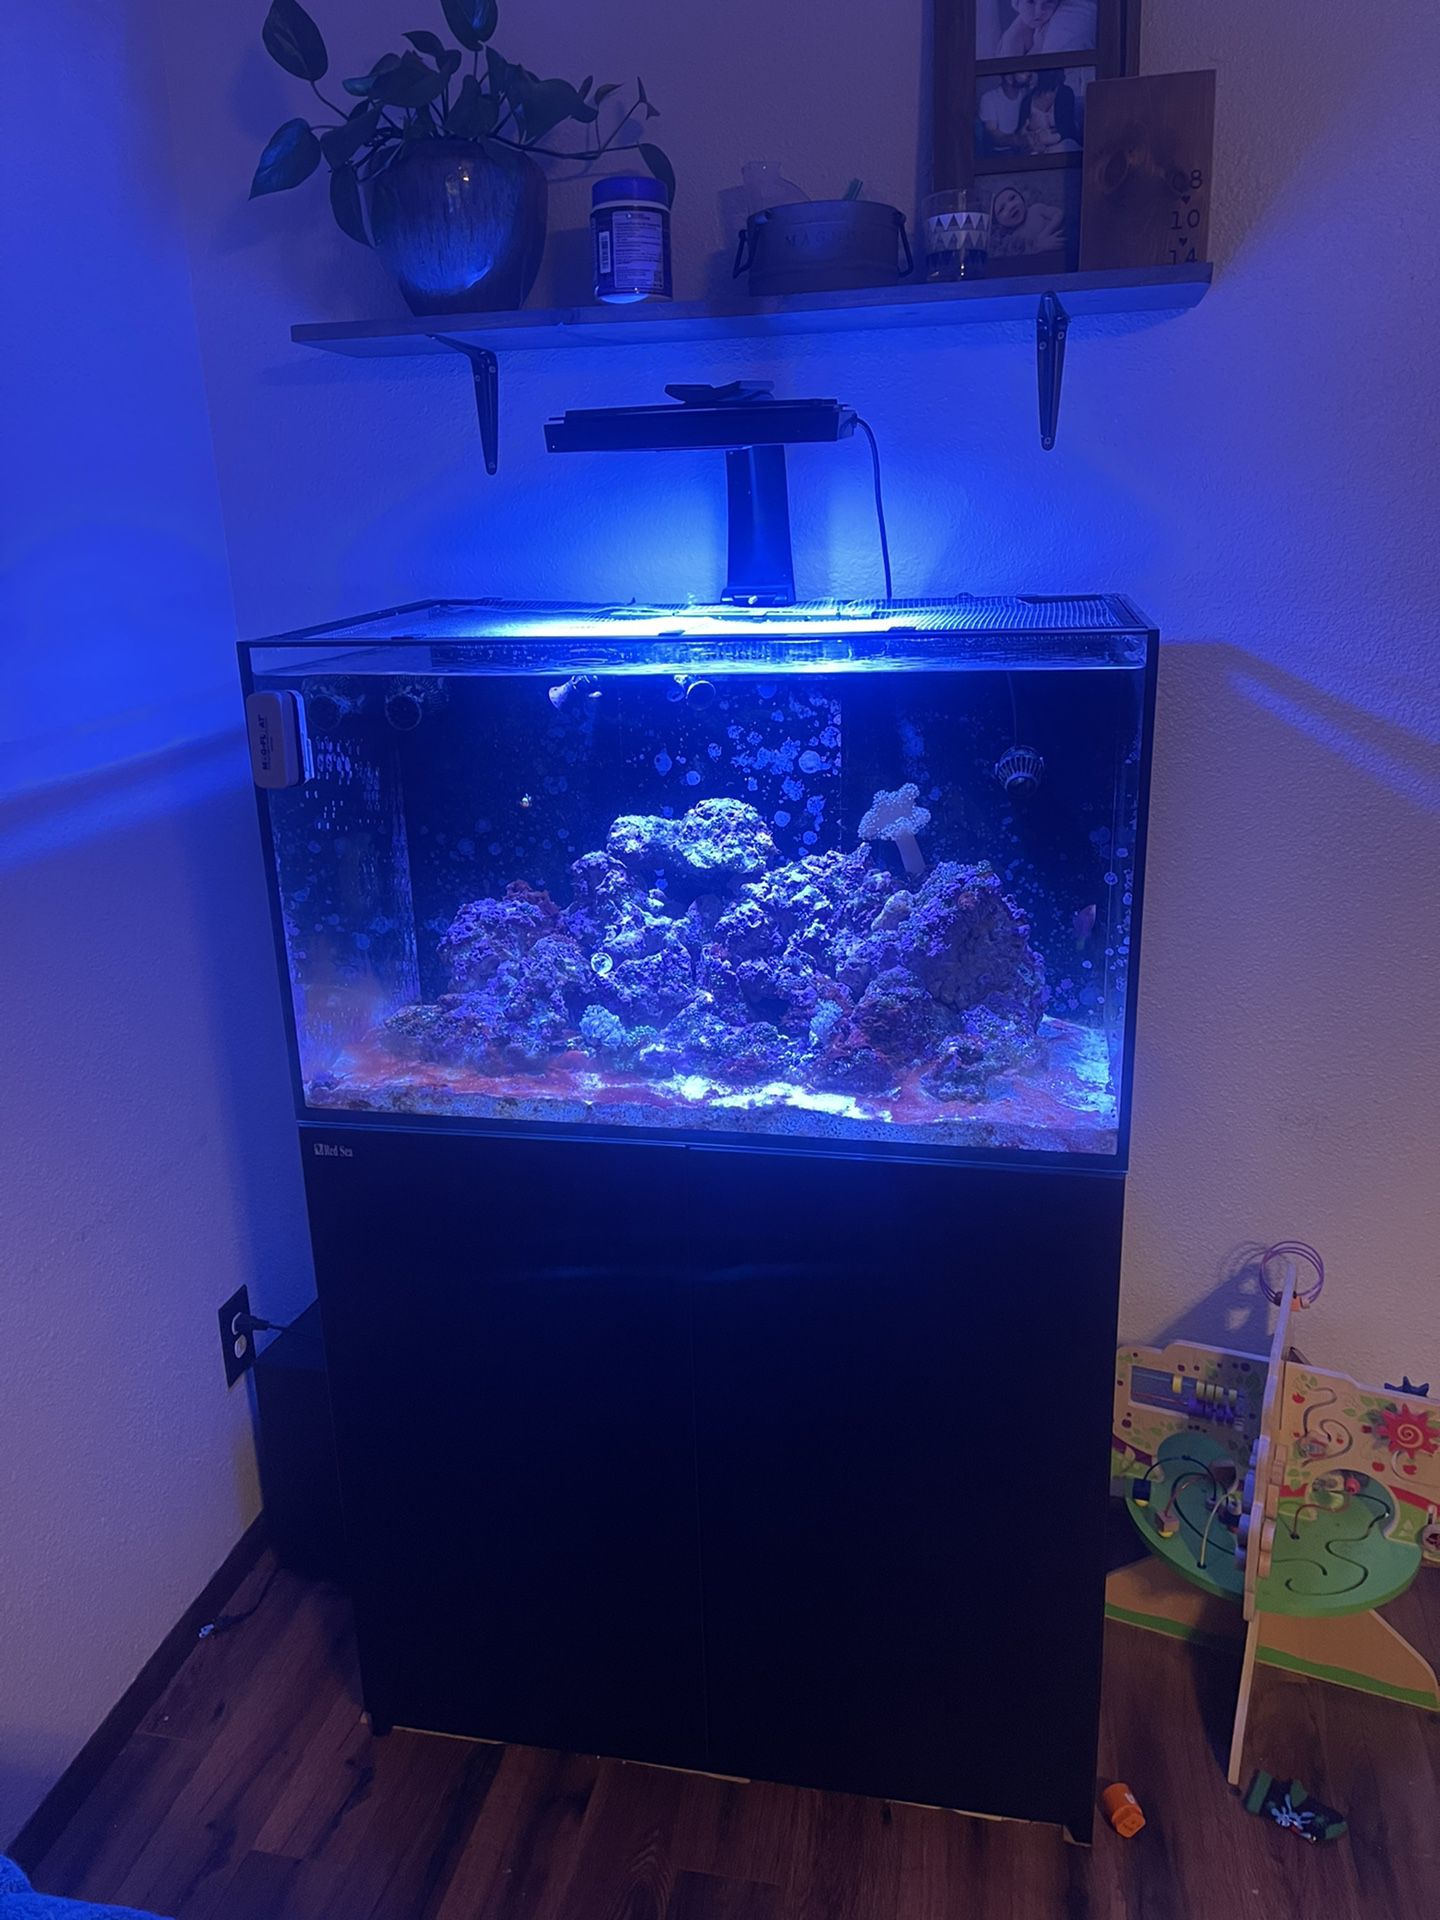 Selling redsea reefer 250 Oct skimmer Eco tech xr15 g2 Eco tech vectra s2 Tunze ato Brs 4 stage 75gpd rodi unit One vortec power head Red sea reefer m